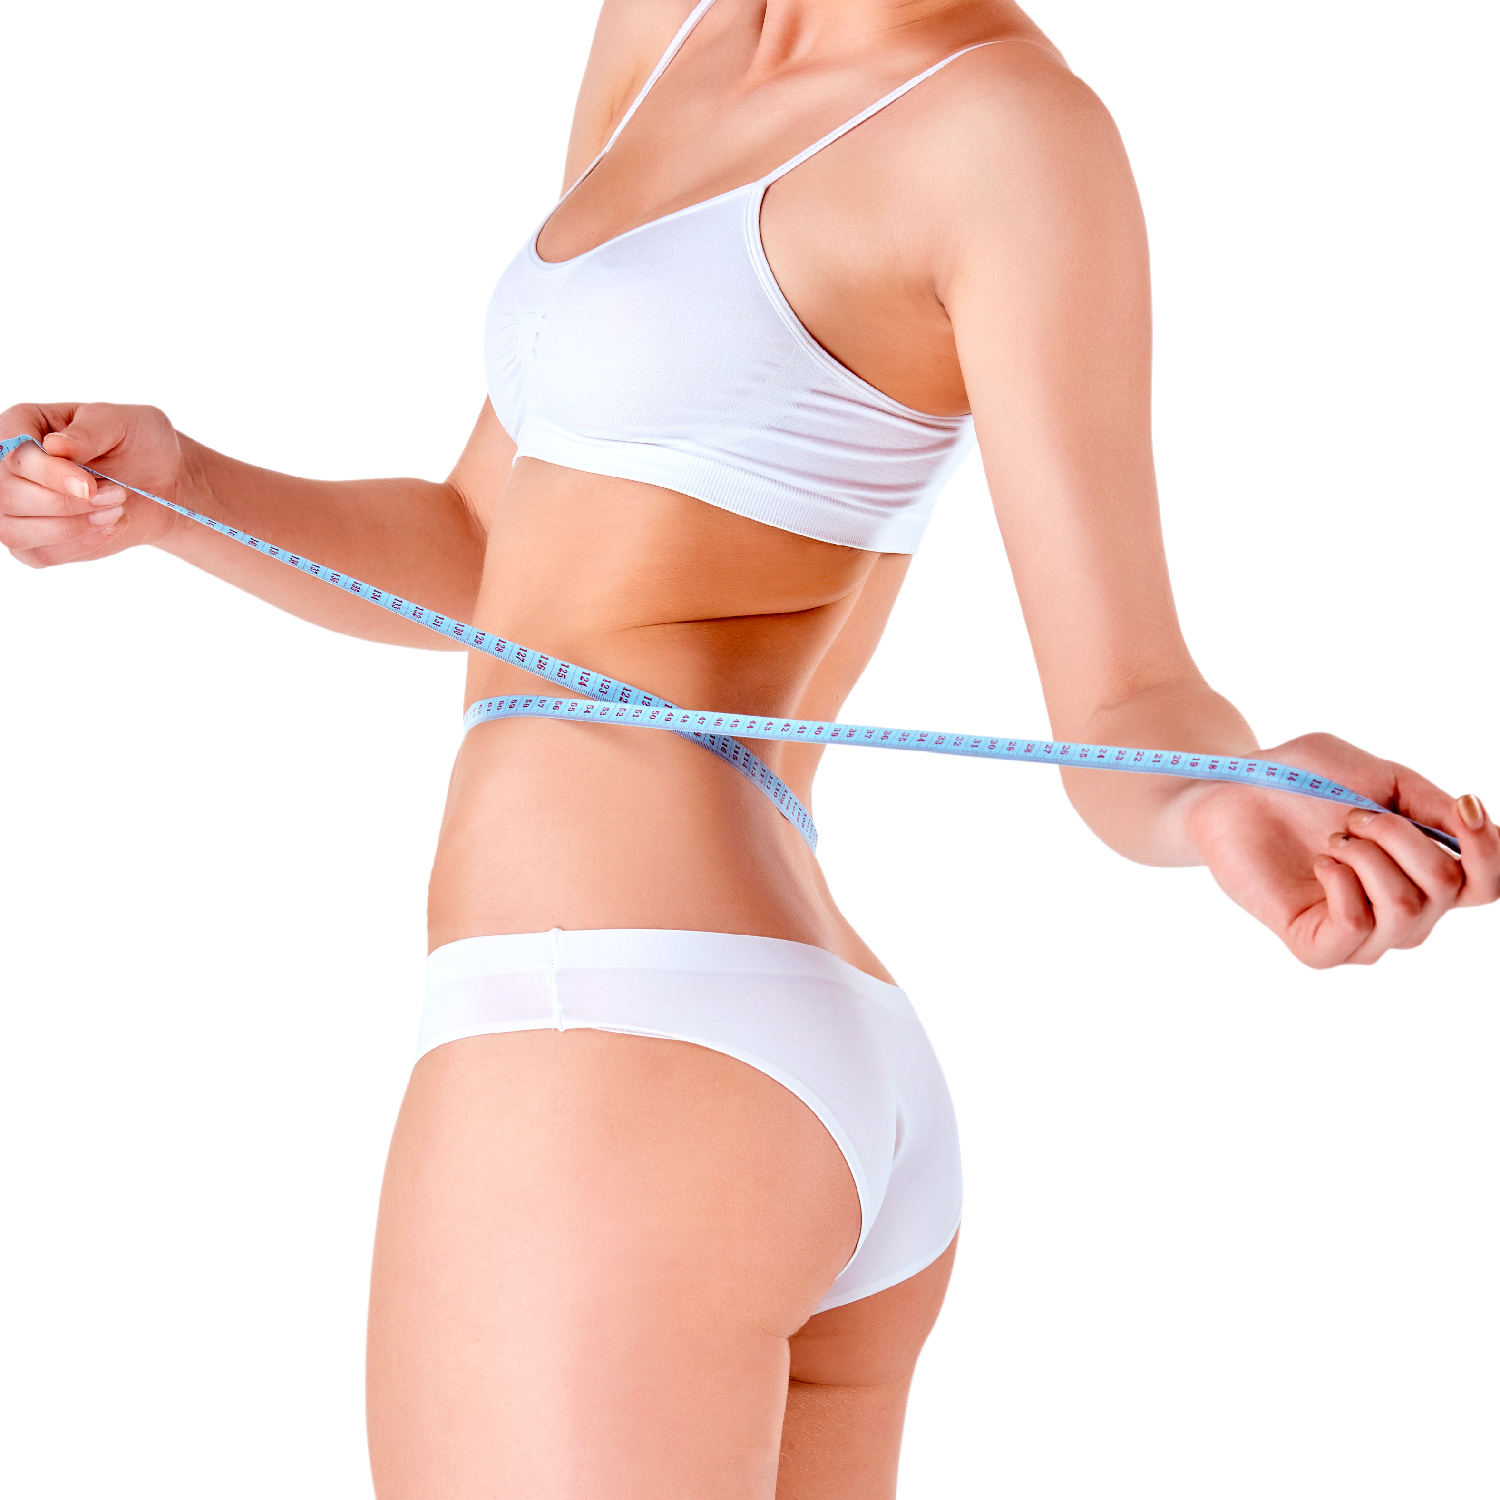 Body Treatment | Pearl Medical and Aesthetics Center